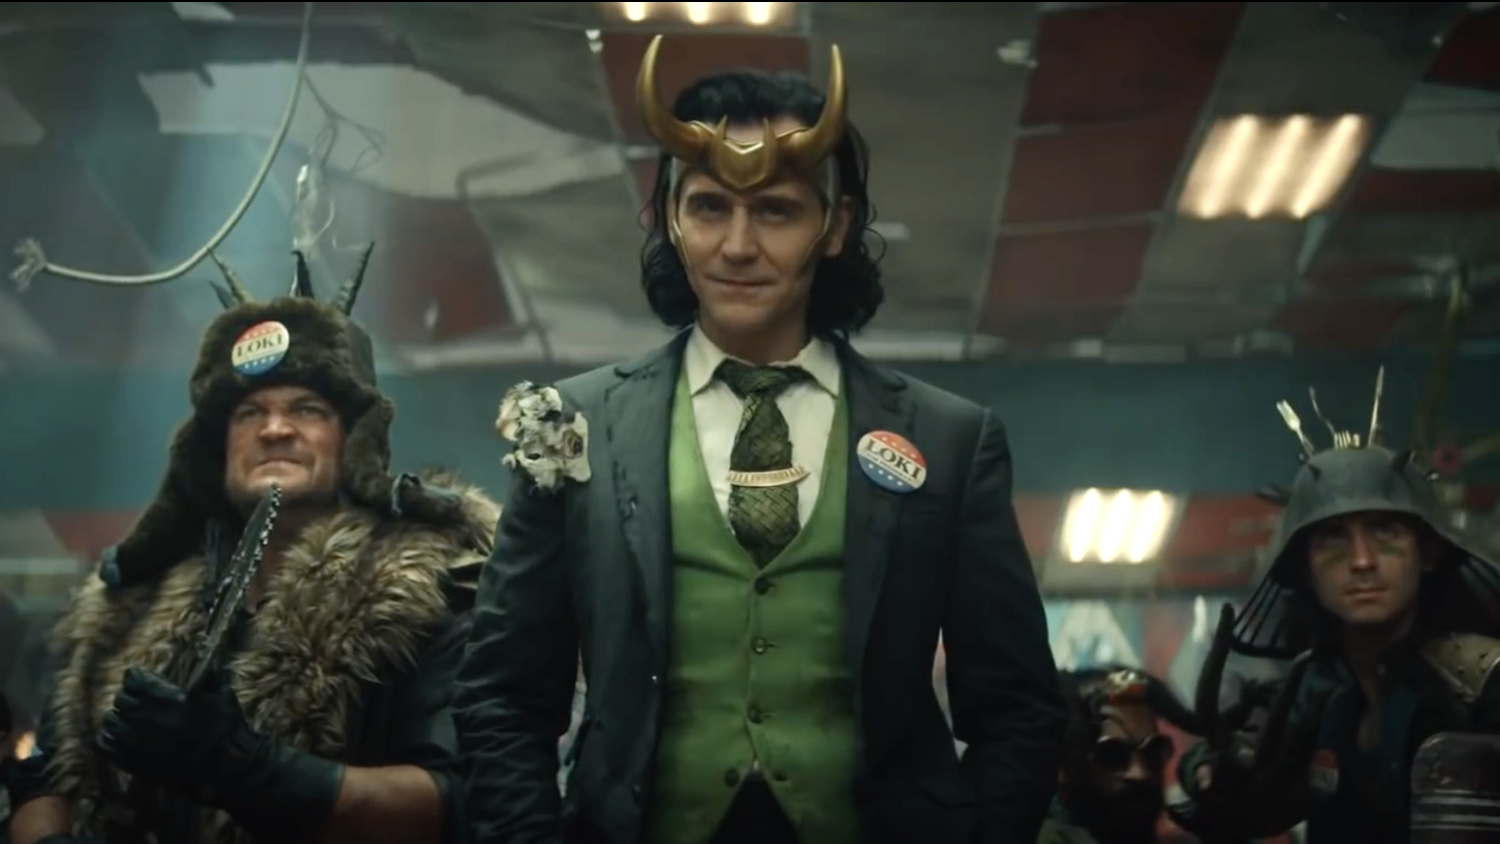 Loki Special Look Airing During Confusing ESPN Basketball/Avengers Themed Special